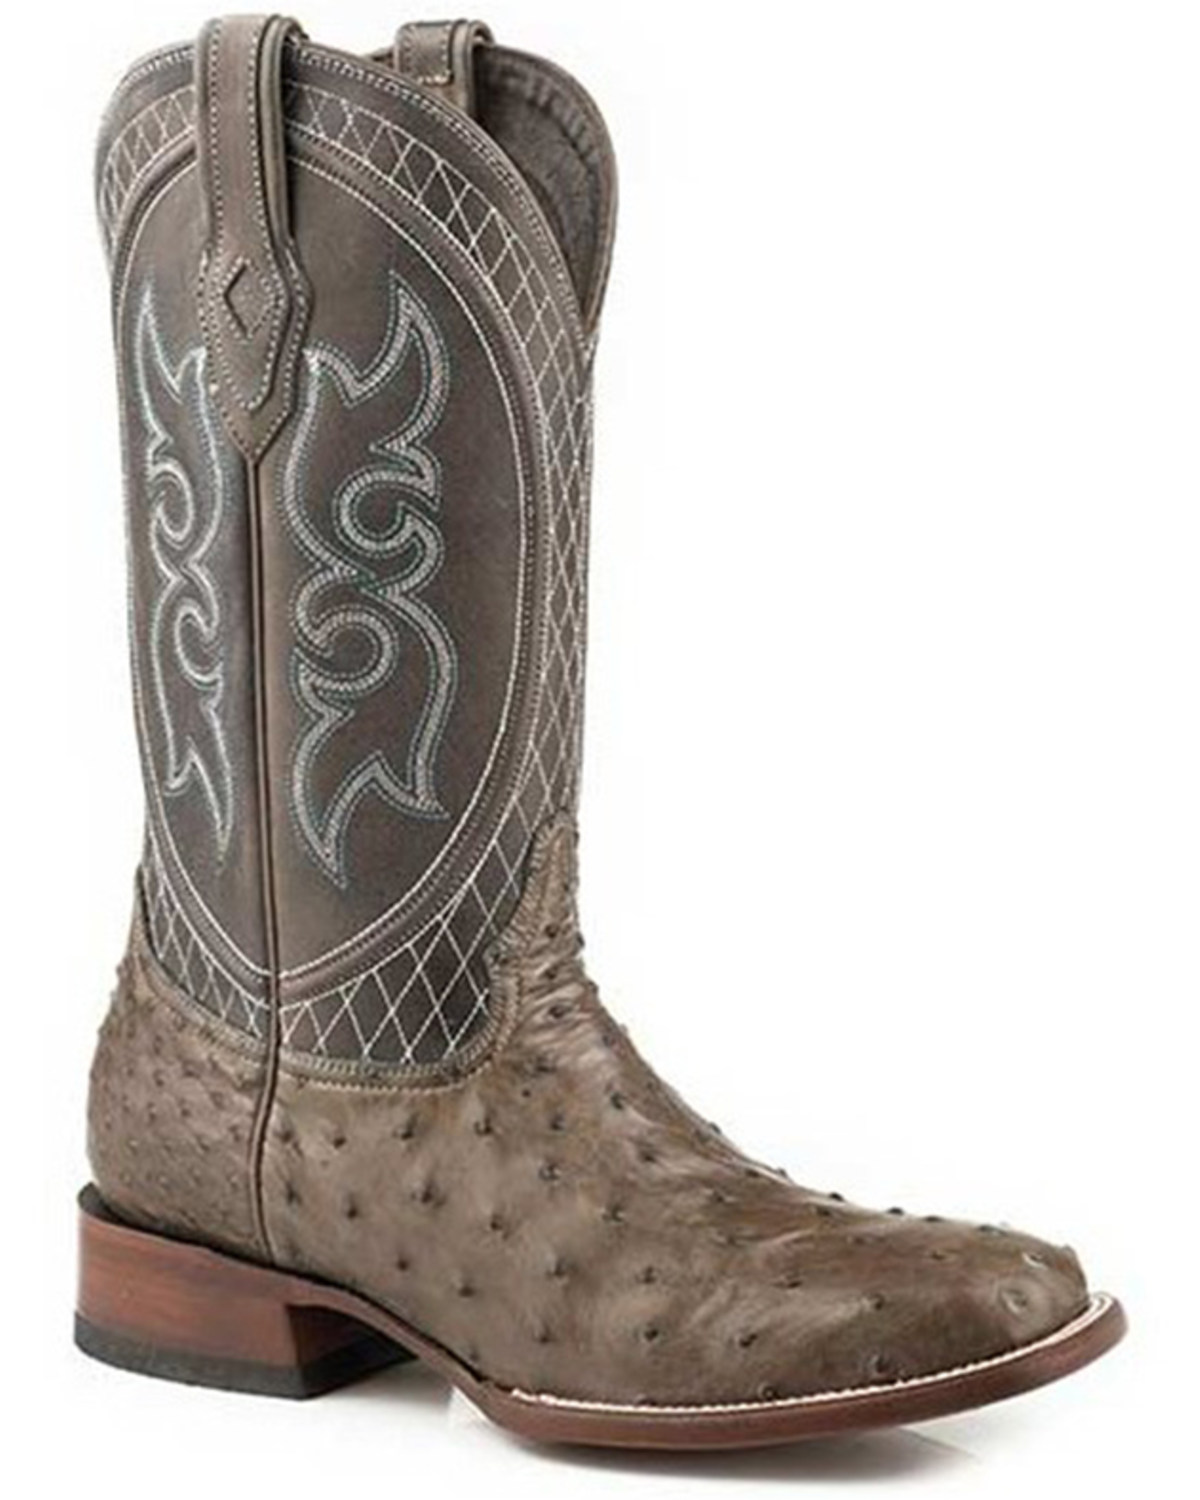 Stetson Men's Ozzy Full-Quill Ostrich Exotic Western Boots - Square Toe